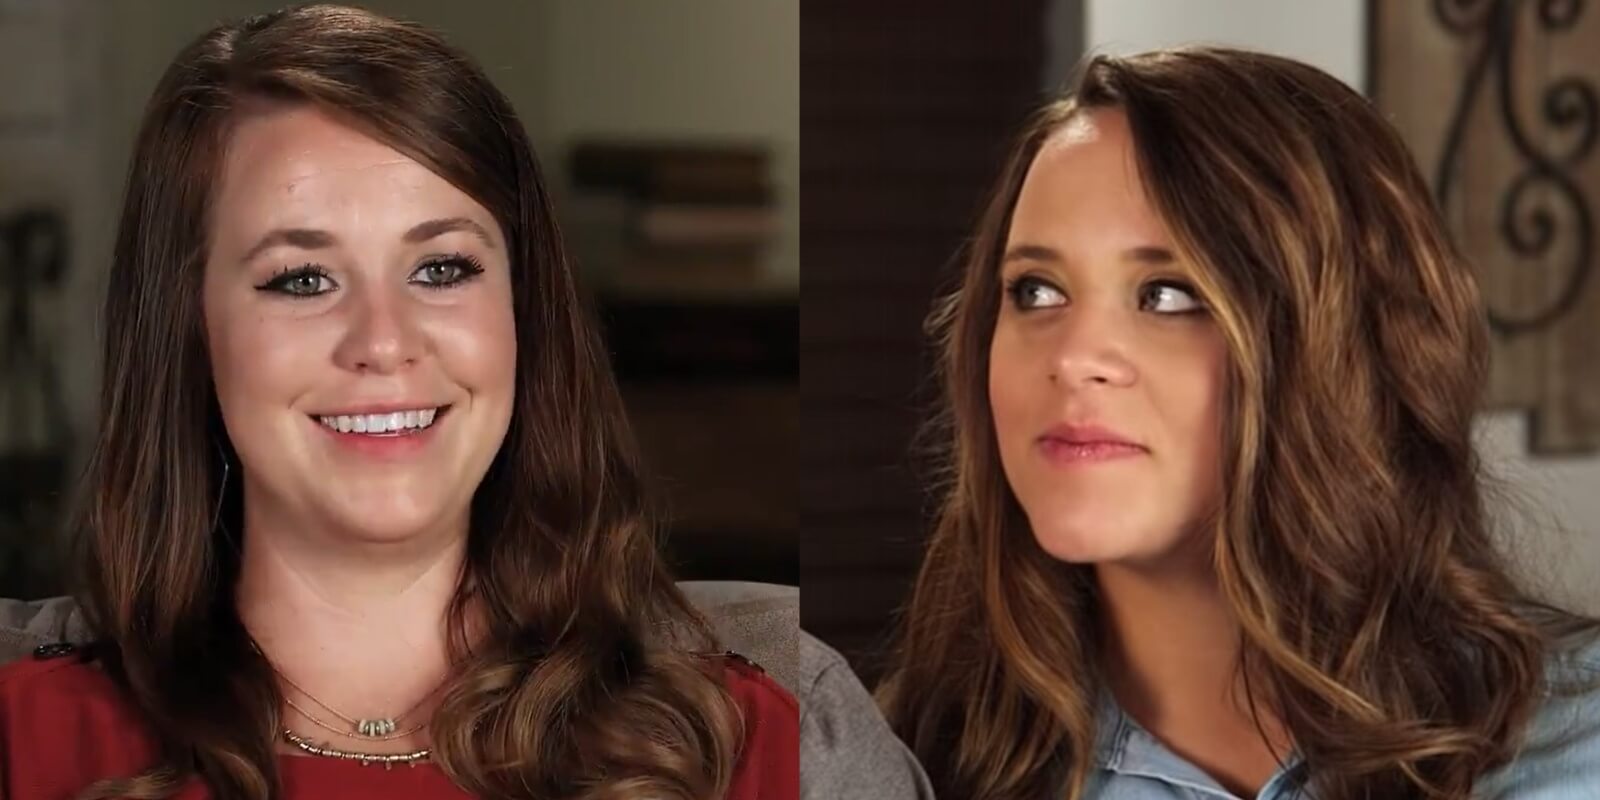 Jana and Jinger Duggar in side-by-side photos taken in confessionals for TLC's 'Counting On.'